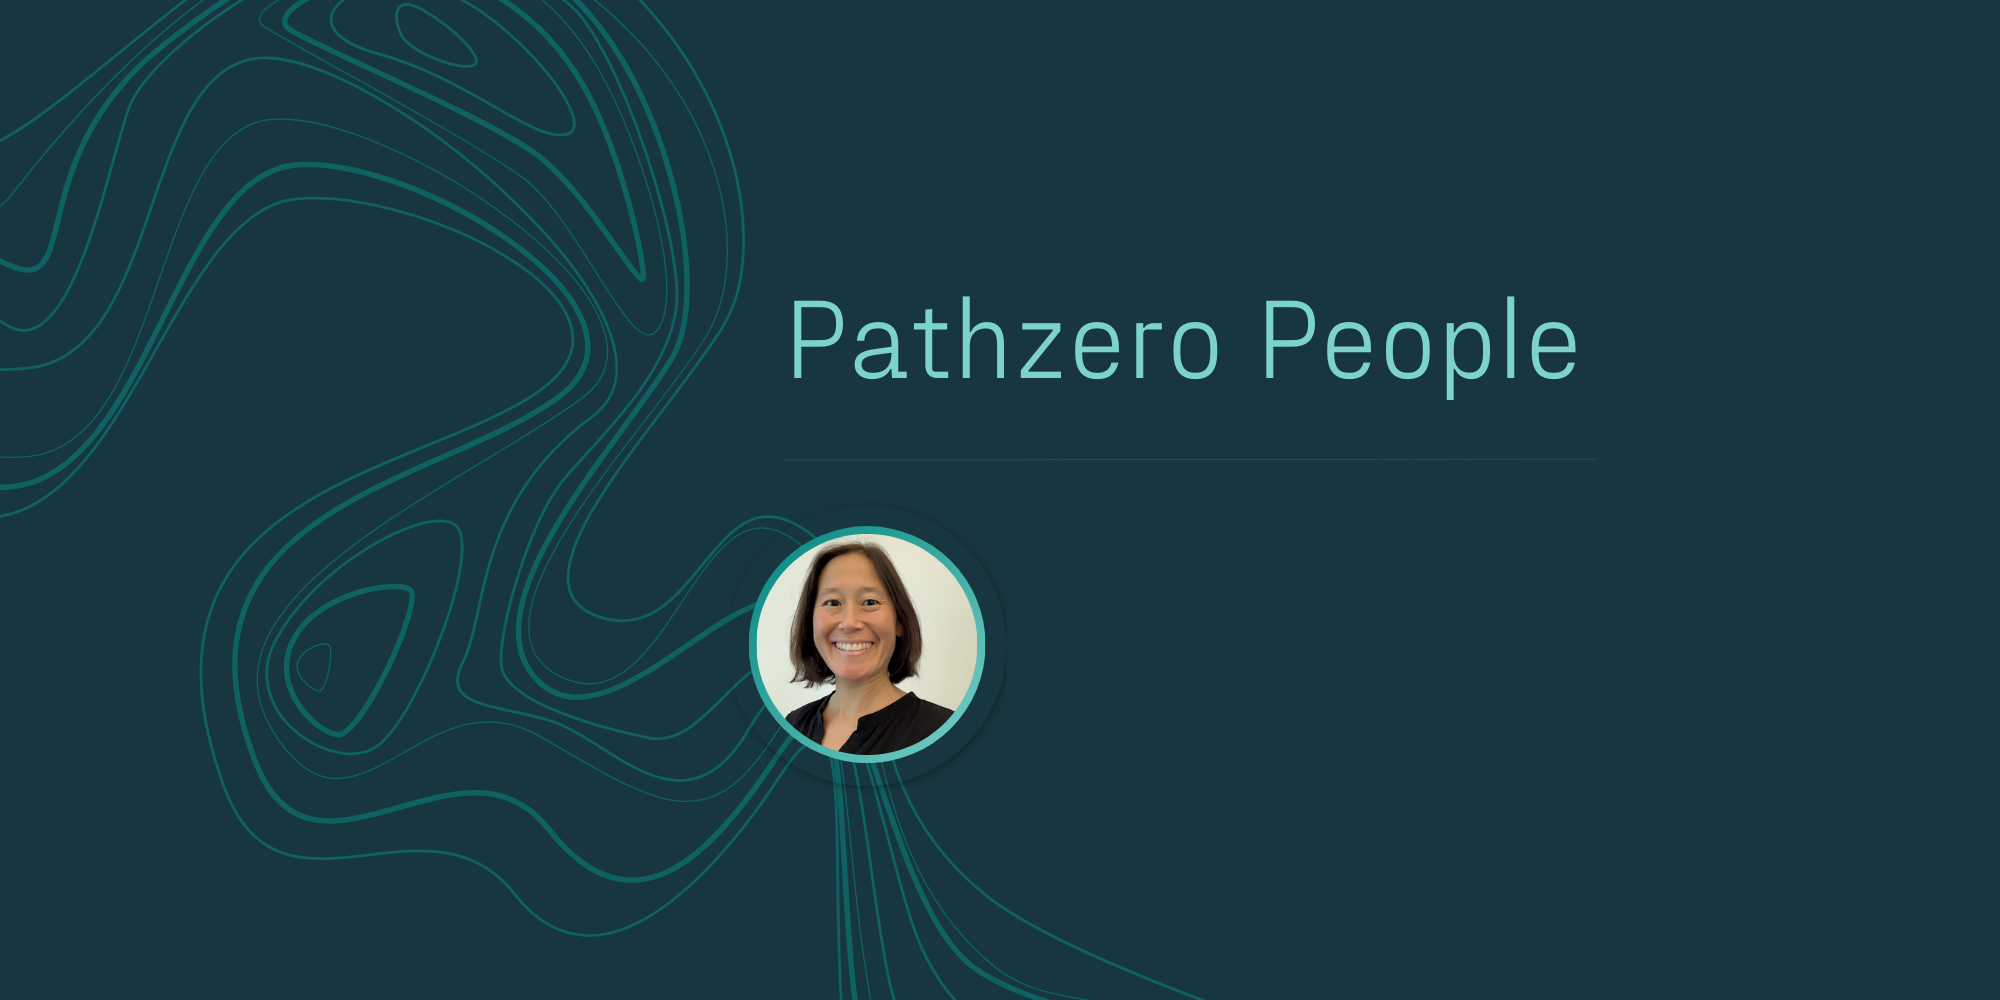 Pathzero People: Audrey Le Clech, Account Manager featured image